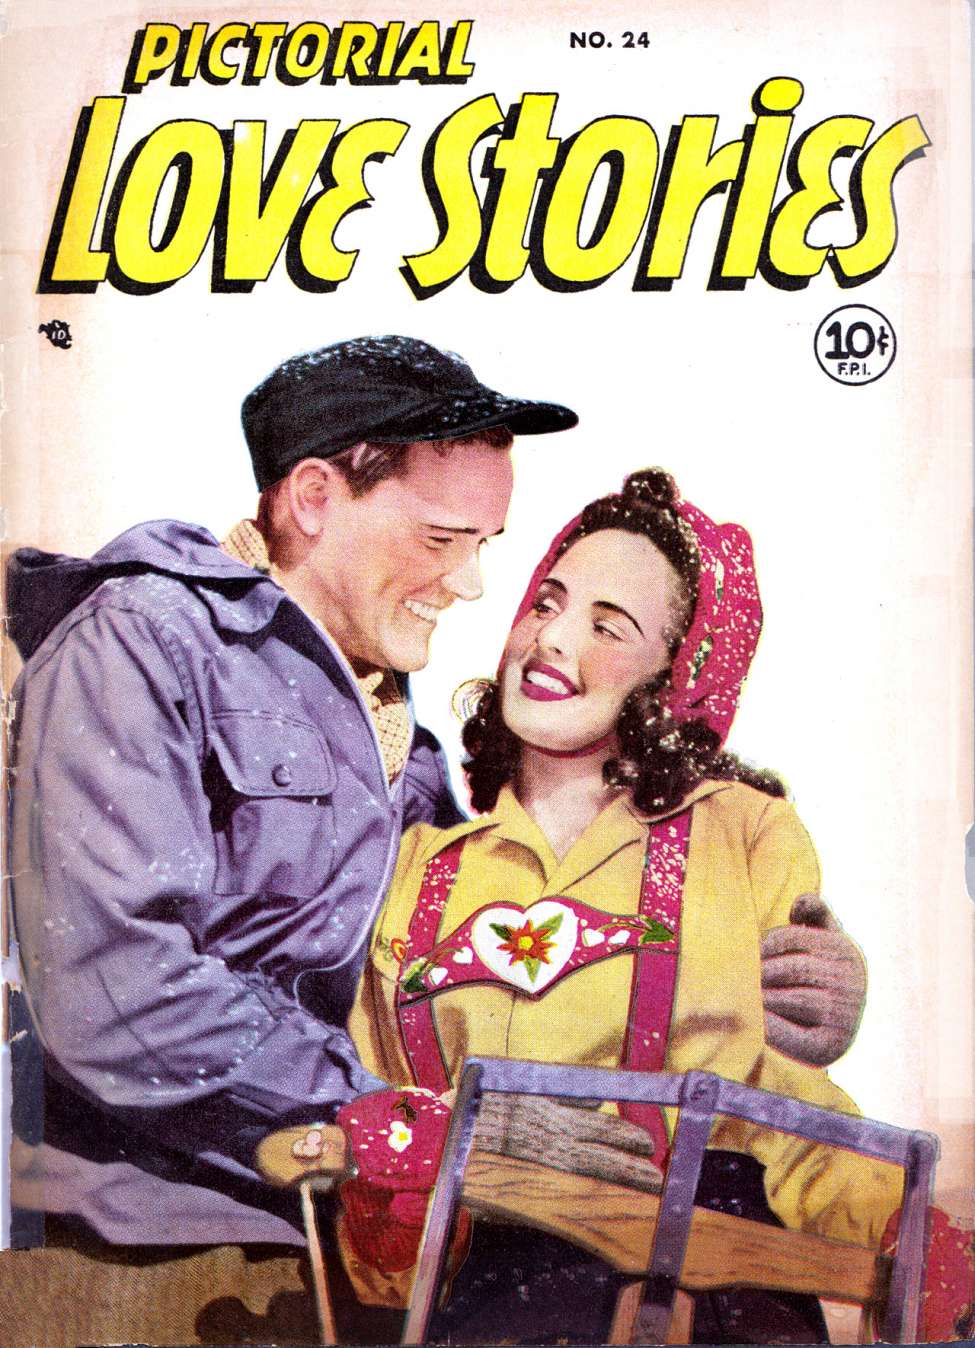 Comic Book Cover For Pictorial Love Stories 24 - Version 1